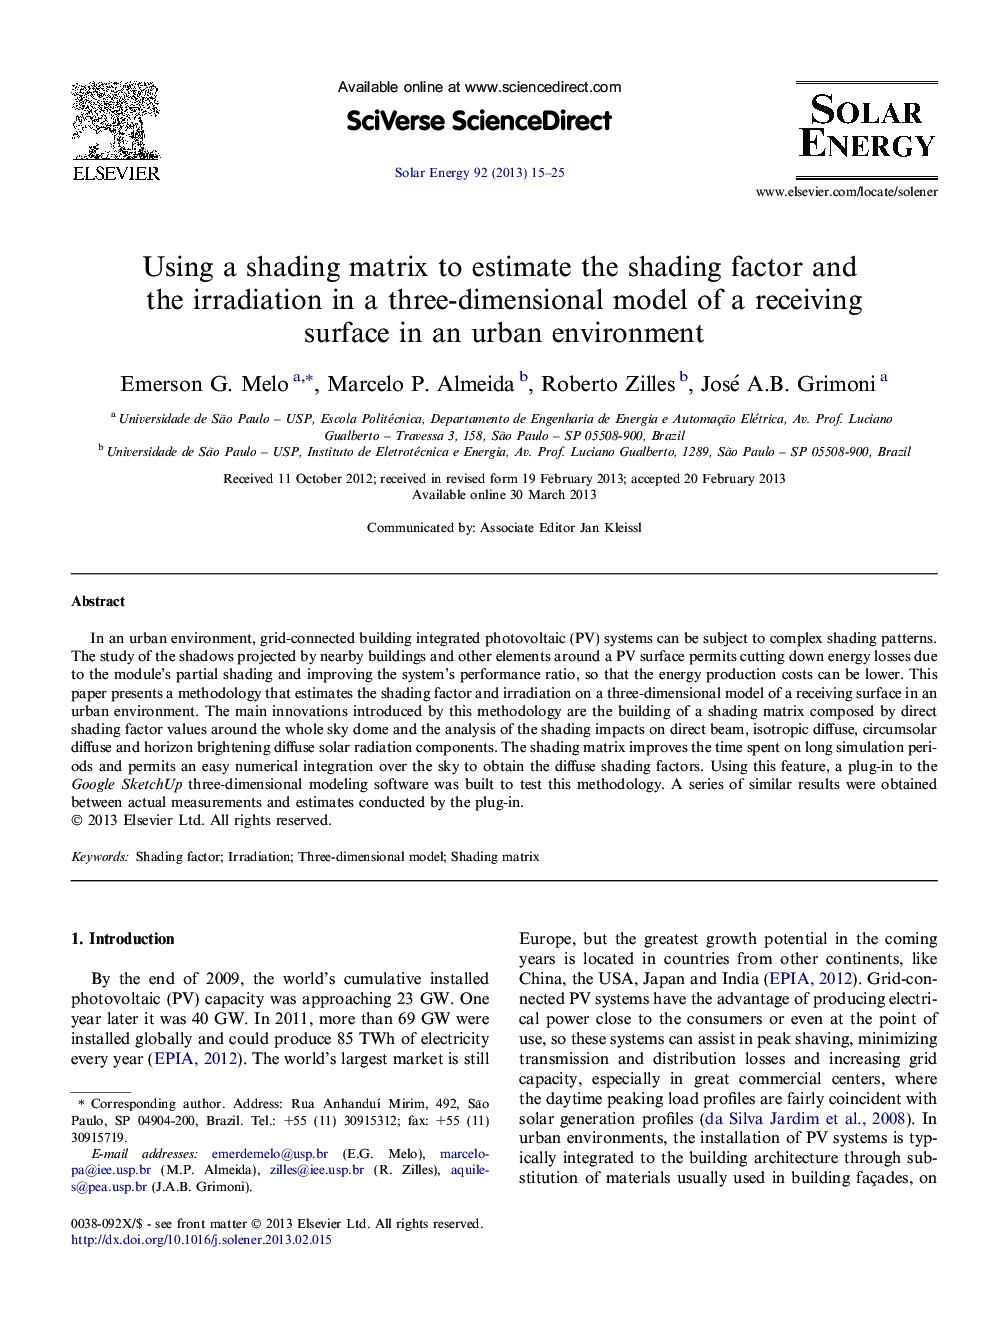 Using a shading matrix to estimate the shading factor and the irradiation in a three-dimensional model of a receiving surface in an urban environment